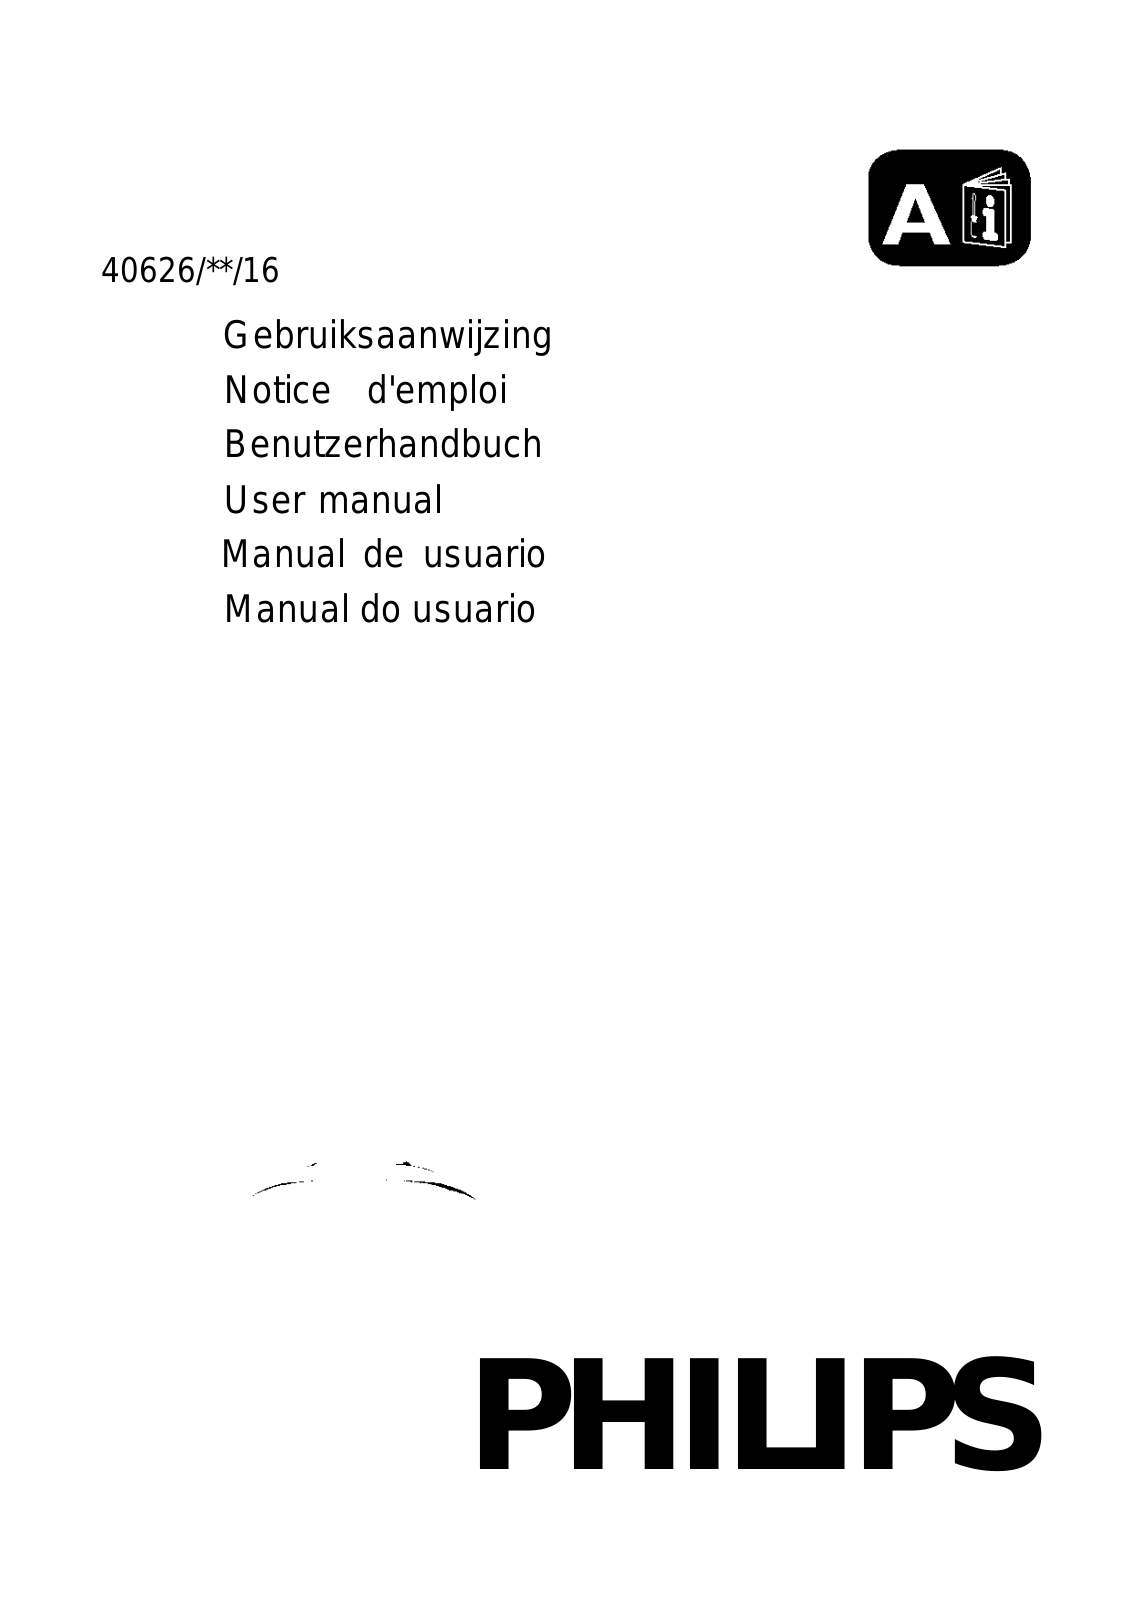 Philips myLiving Suspension User Manual